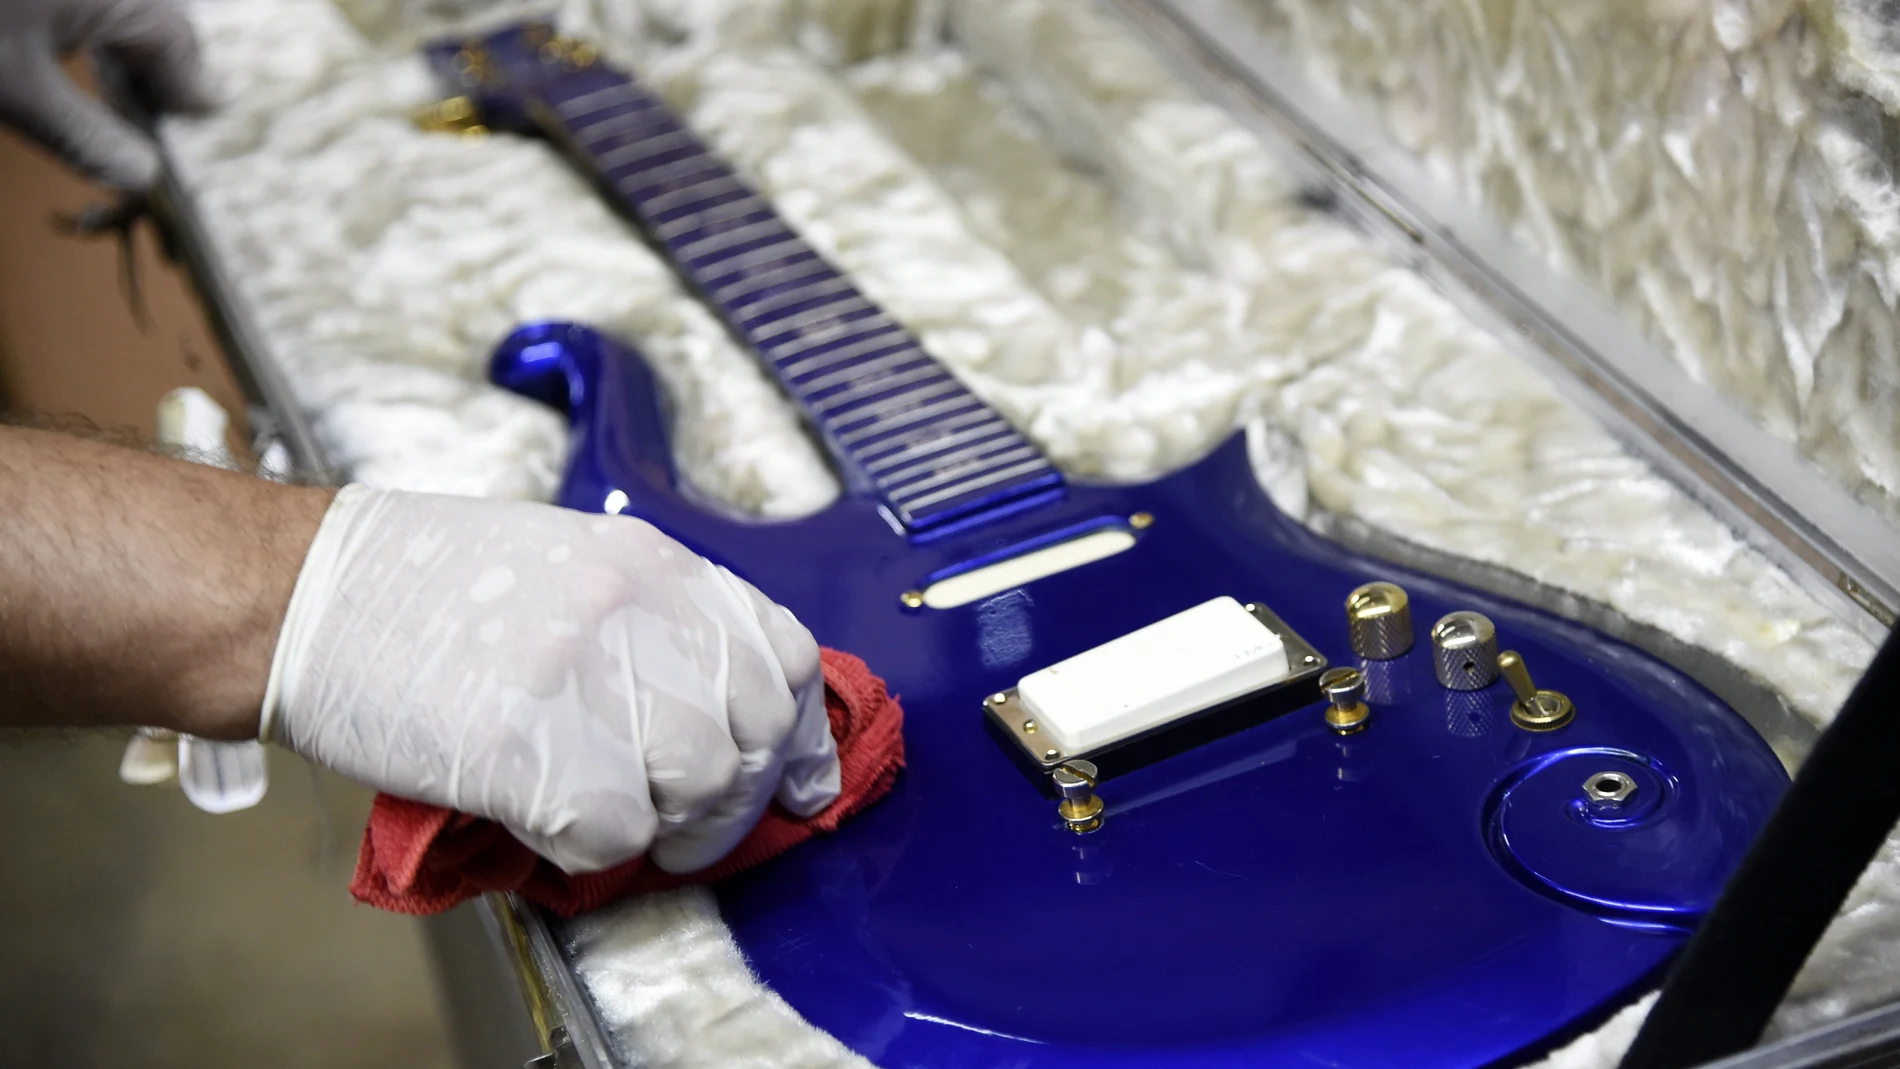 A blue "cloud" guitar custom-made in the 1980s for the late musician Prince is polished at Julien's Auctions warehouse, Wednesday, May 6, 2020, in Culver City, Calif. Julien's Auctions announced Monday that the guitar will be part of a major music artifacts auction taking place on June 19 and 20 in Beverly Hills and online. (AP Photo/Chris Pizzello)